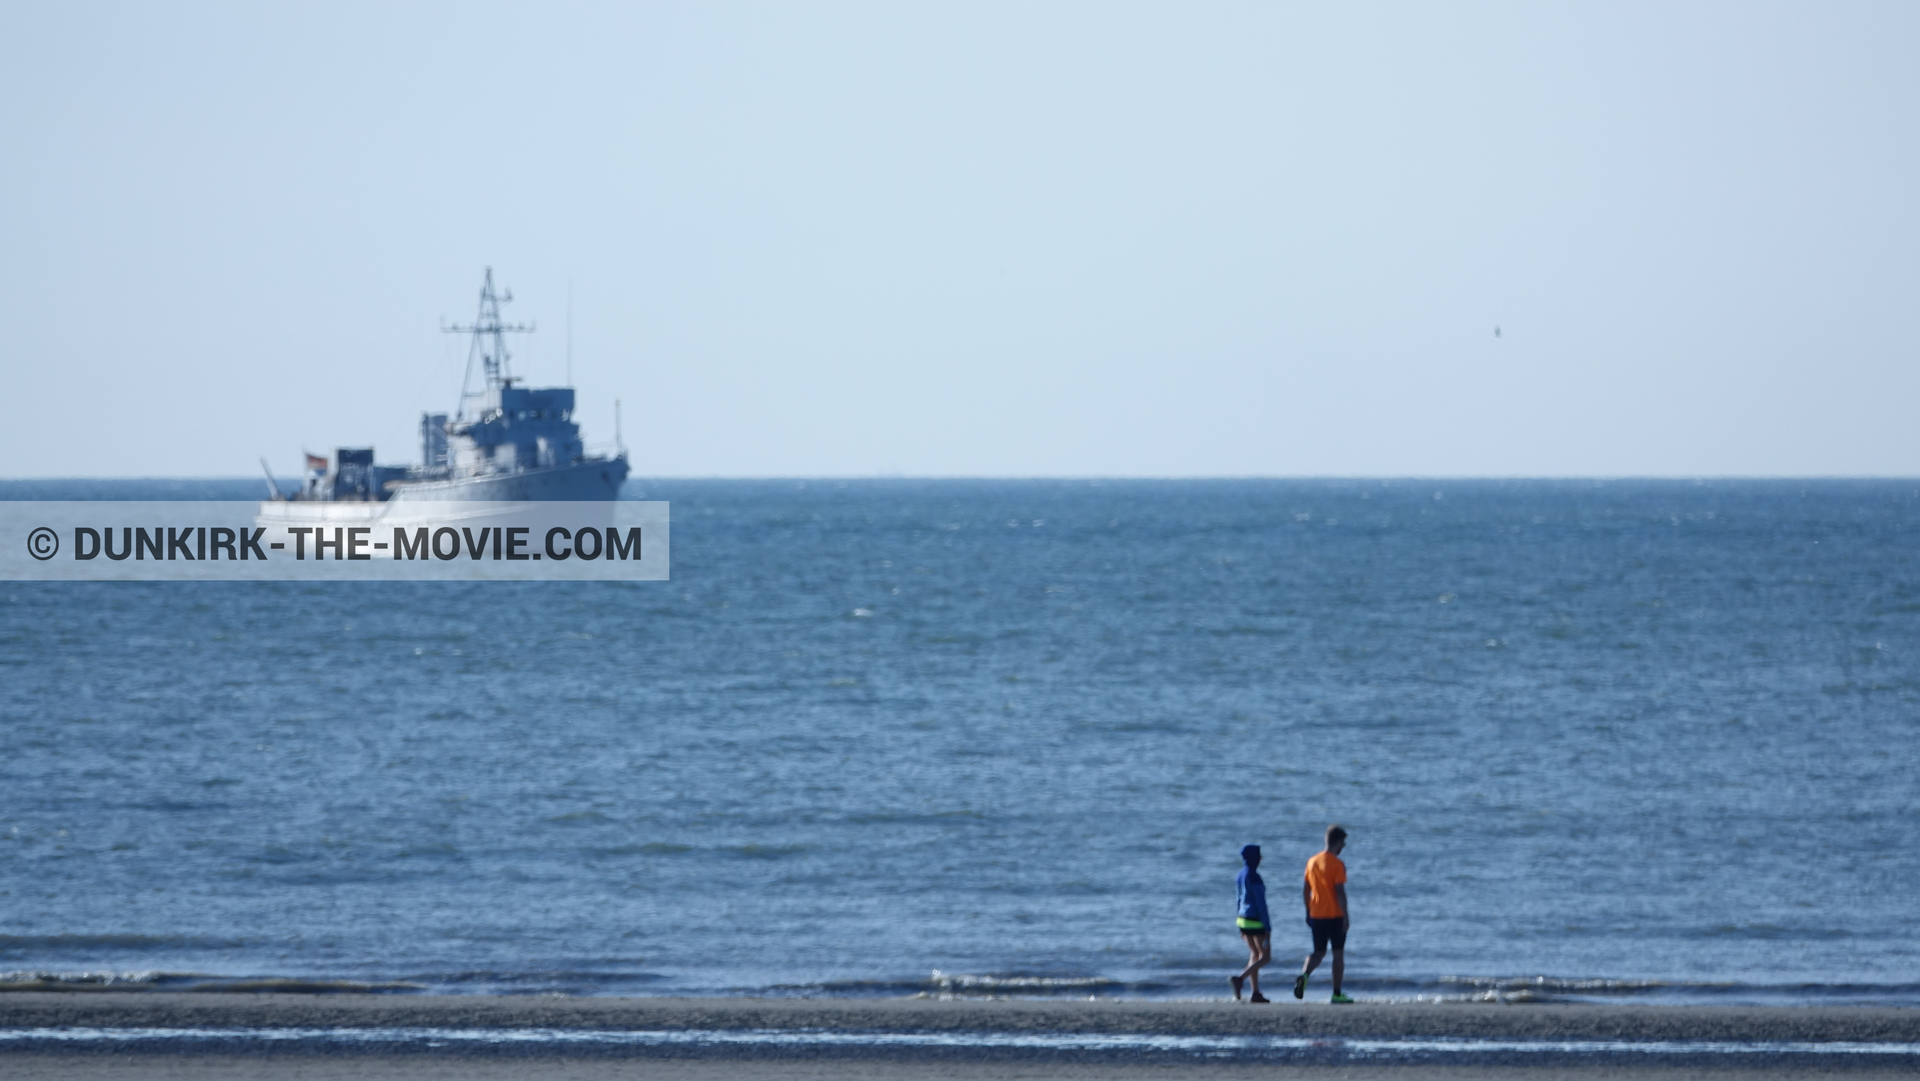 Picture with F34 - Hr.Ms. Sittard, beach,  from behind the scene of the Dunkirk movie by Nolan